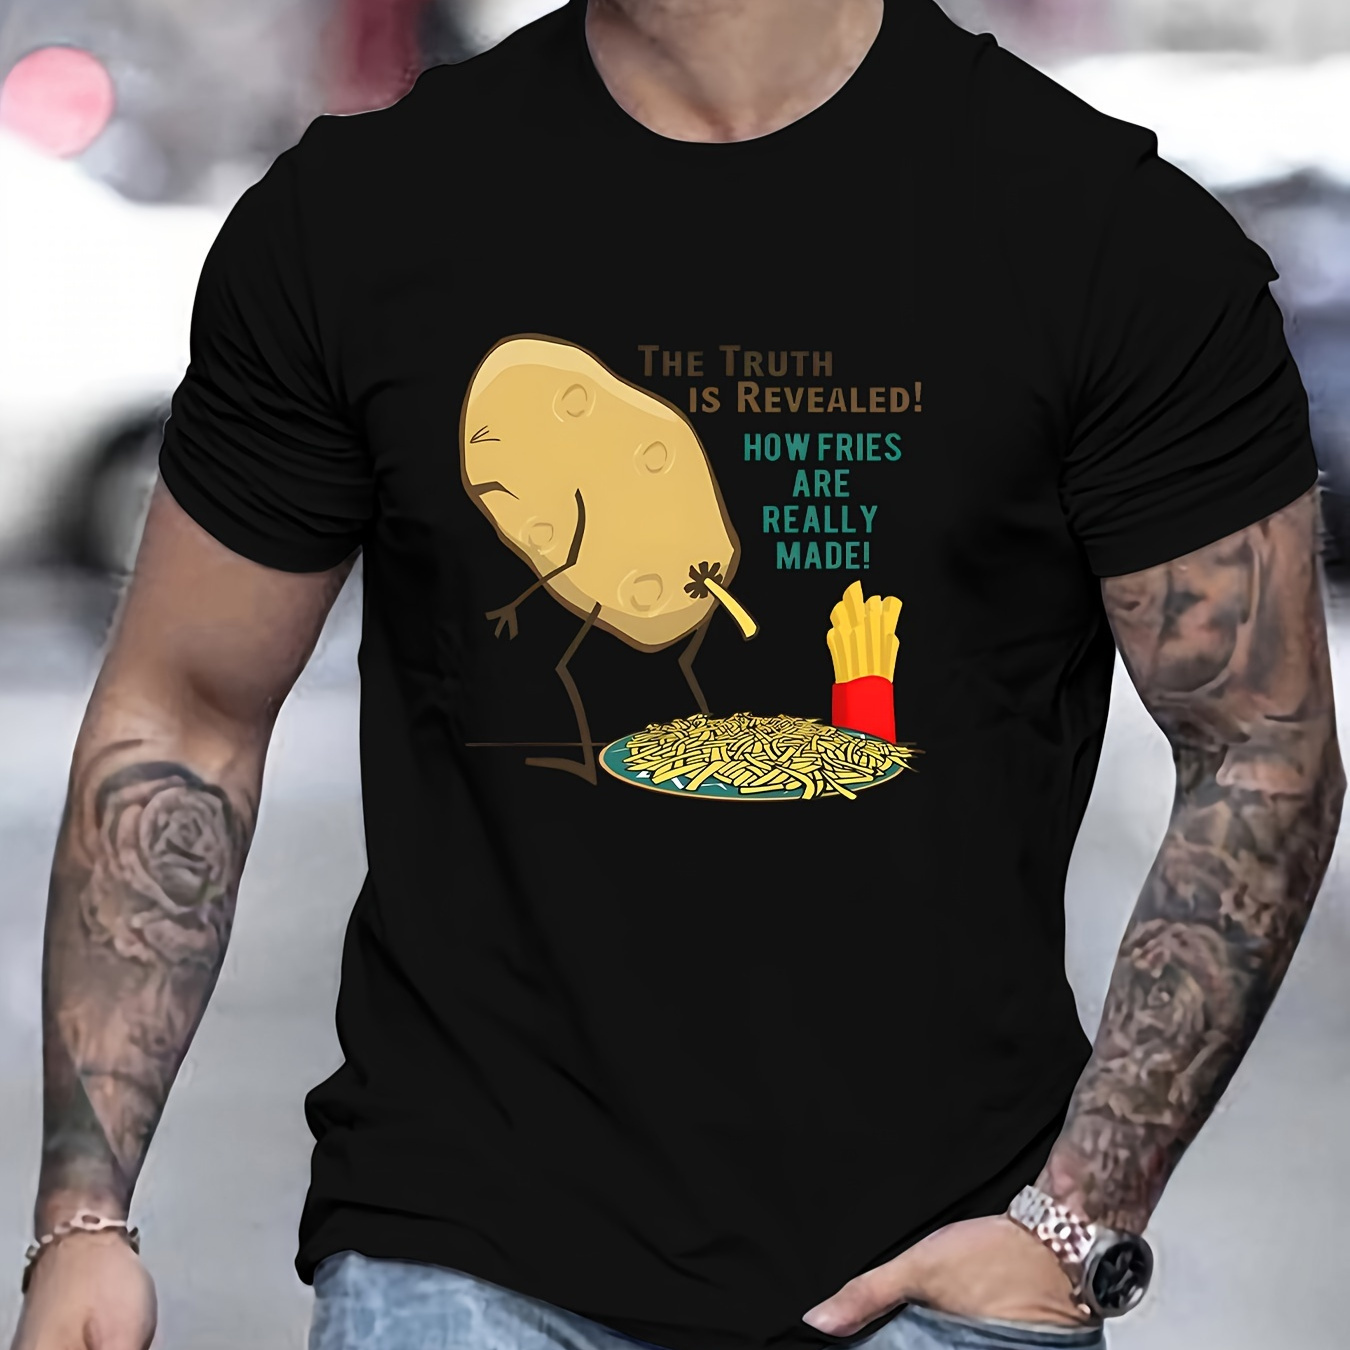 

Potato Producing French Fries Print Tee Shirt, Tees For Men, Casual Short Sleeve T-shirt For Summer